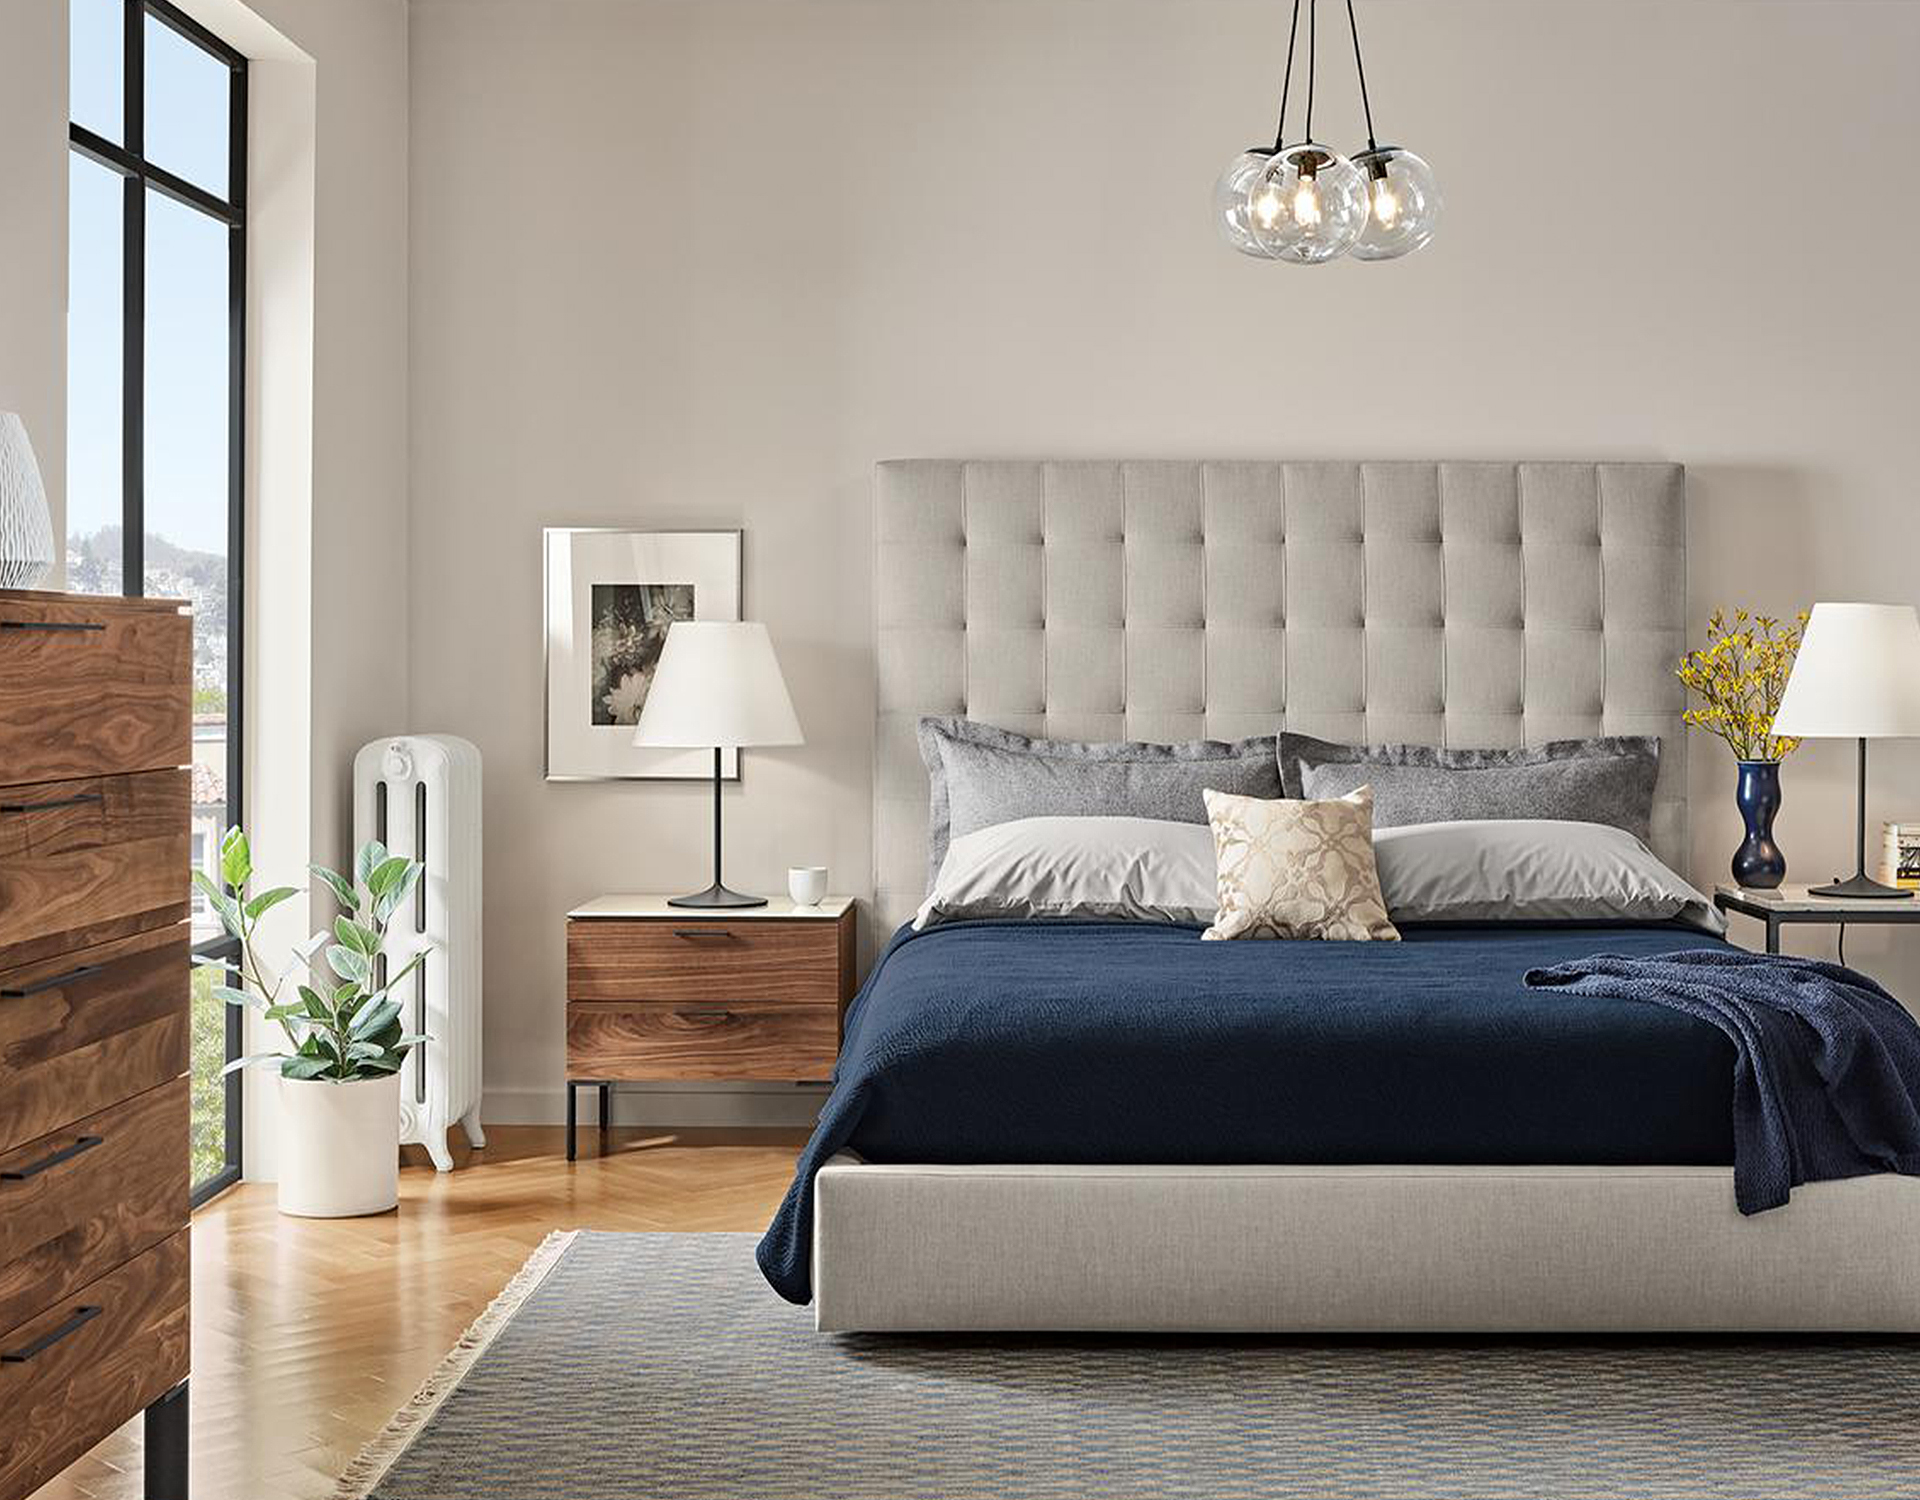 Headboard Height, What Is The Average Height Of A Headboard